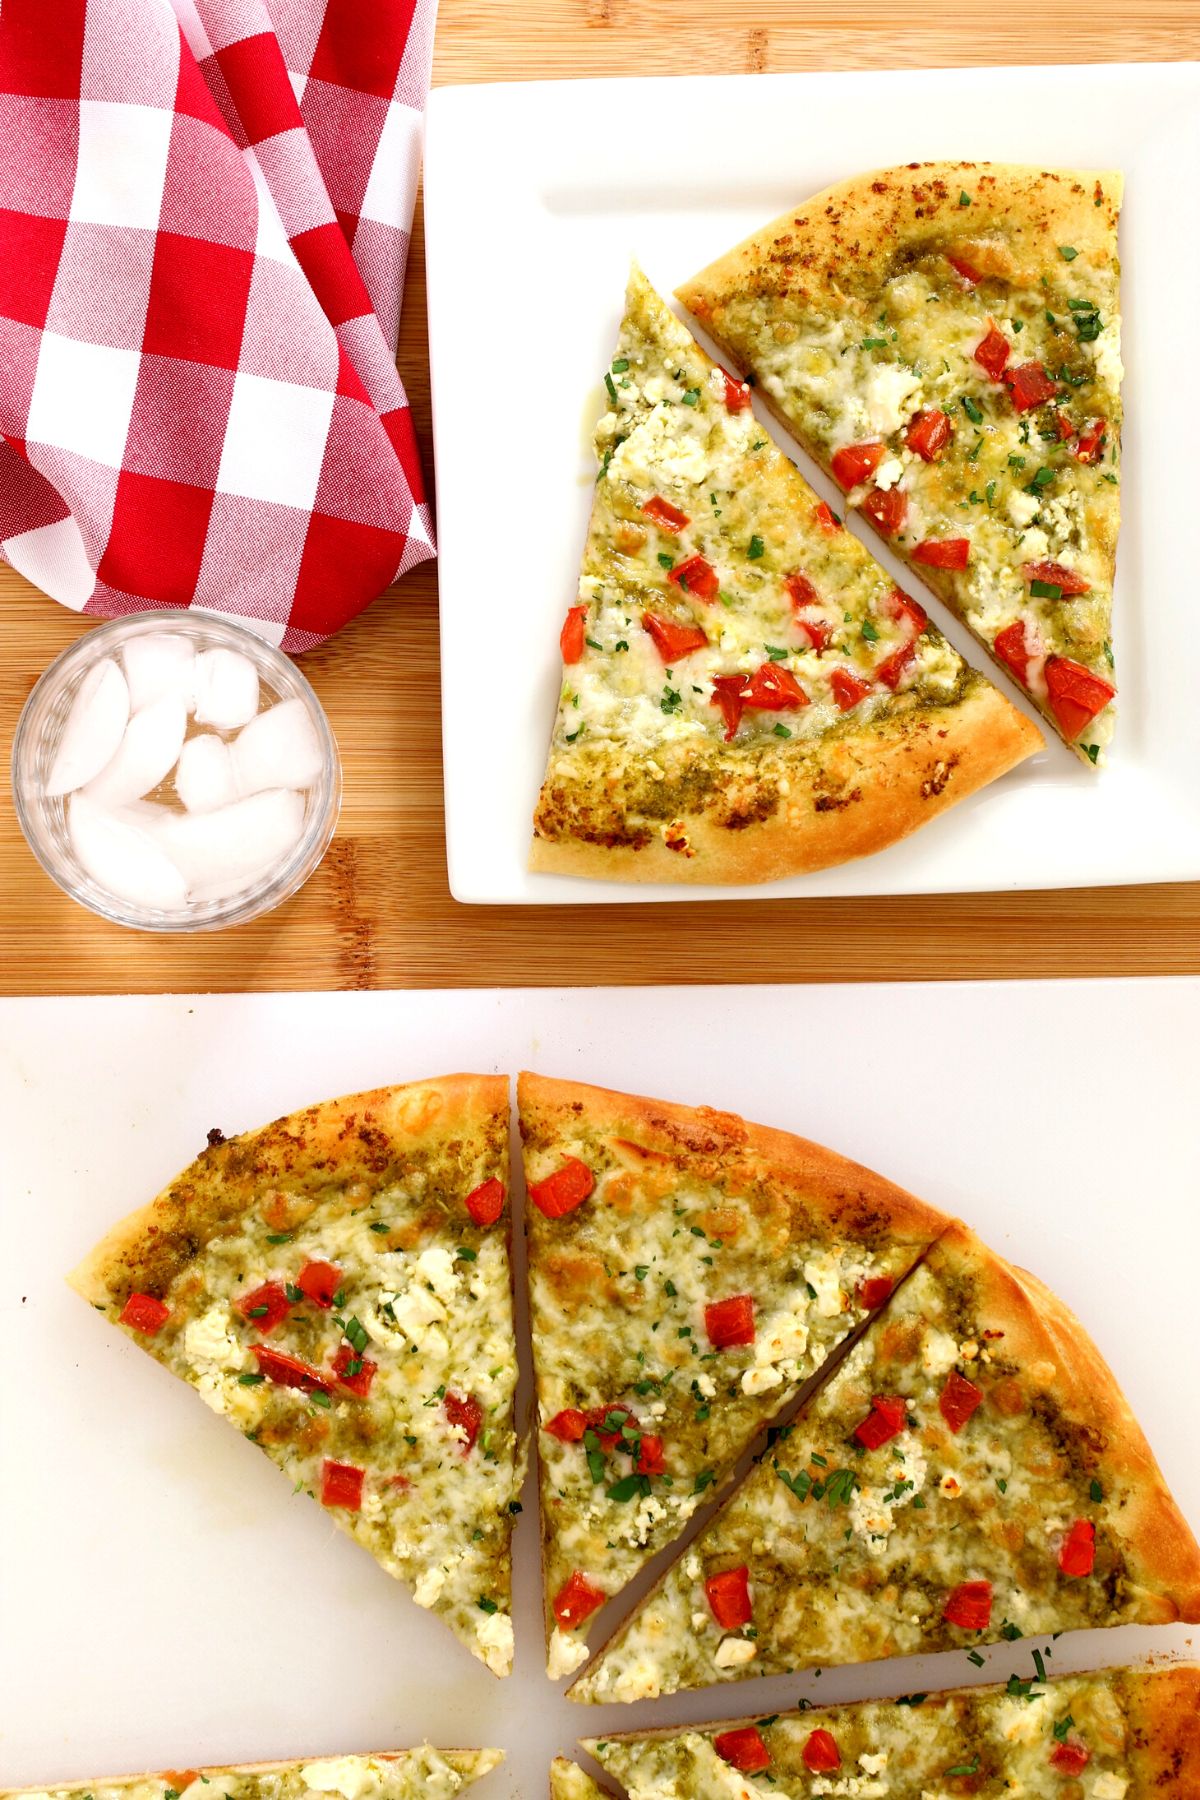 pesto pizza dished up on a square plate with a whole pizza sliced on cutting board.